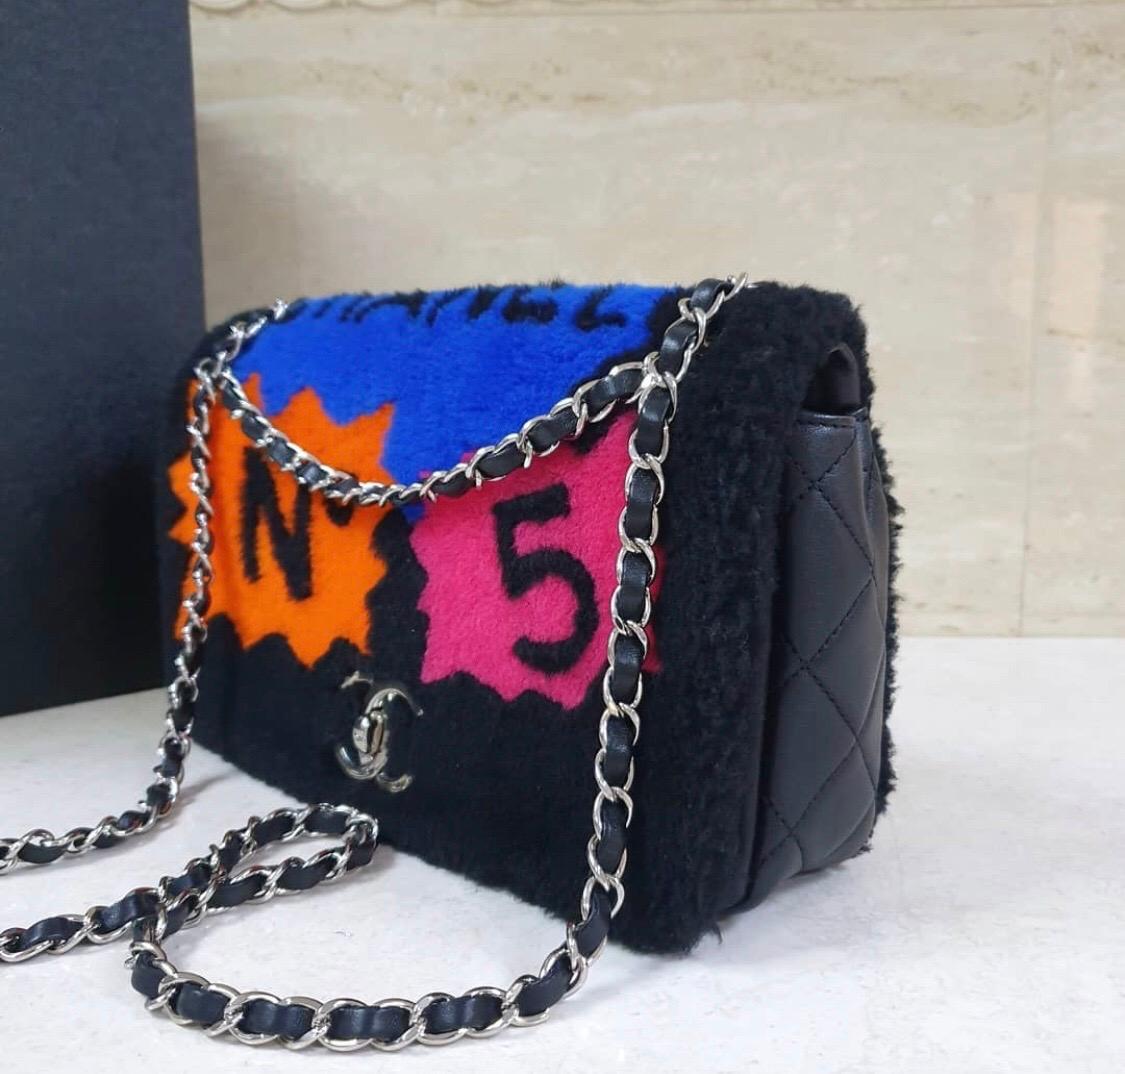 Chanel 14A Patchwork No. 5 Caption Comic Shearling jumbo flap bag in black. 
Limited edition bagю
Comic text design in hot pink, orange, yellow, and blue.
Soft shearling exterior with quilted lambskin body.
Jumbo size measuring  28*15*8 cm
Dust bag